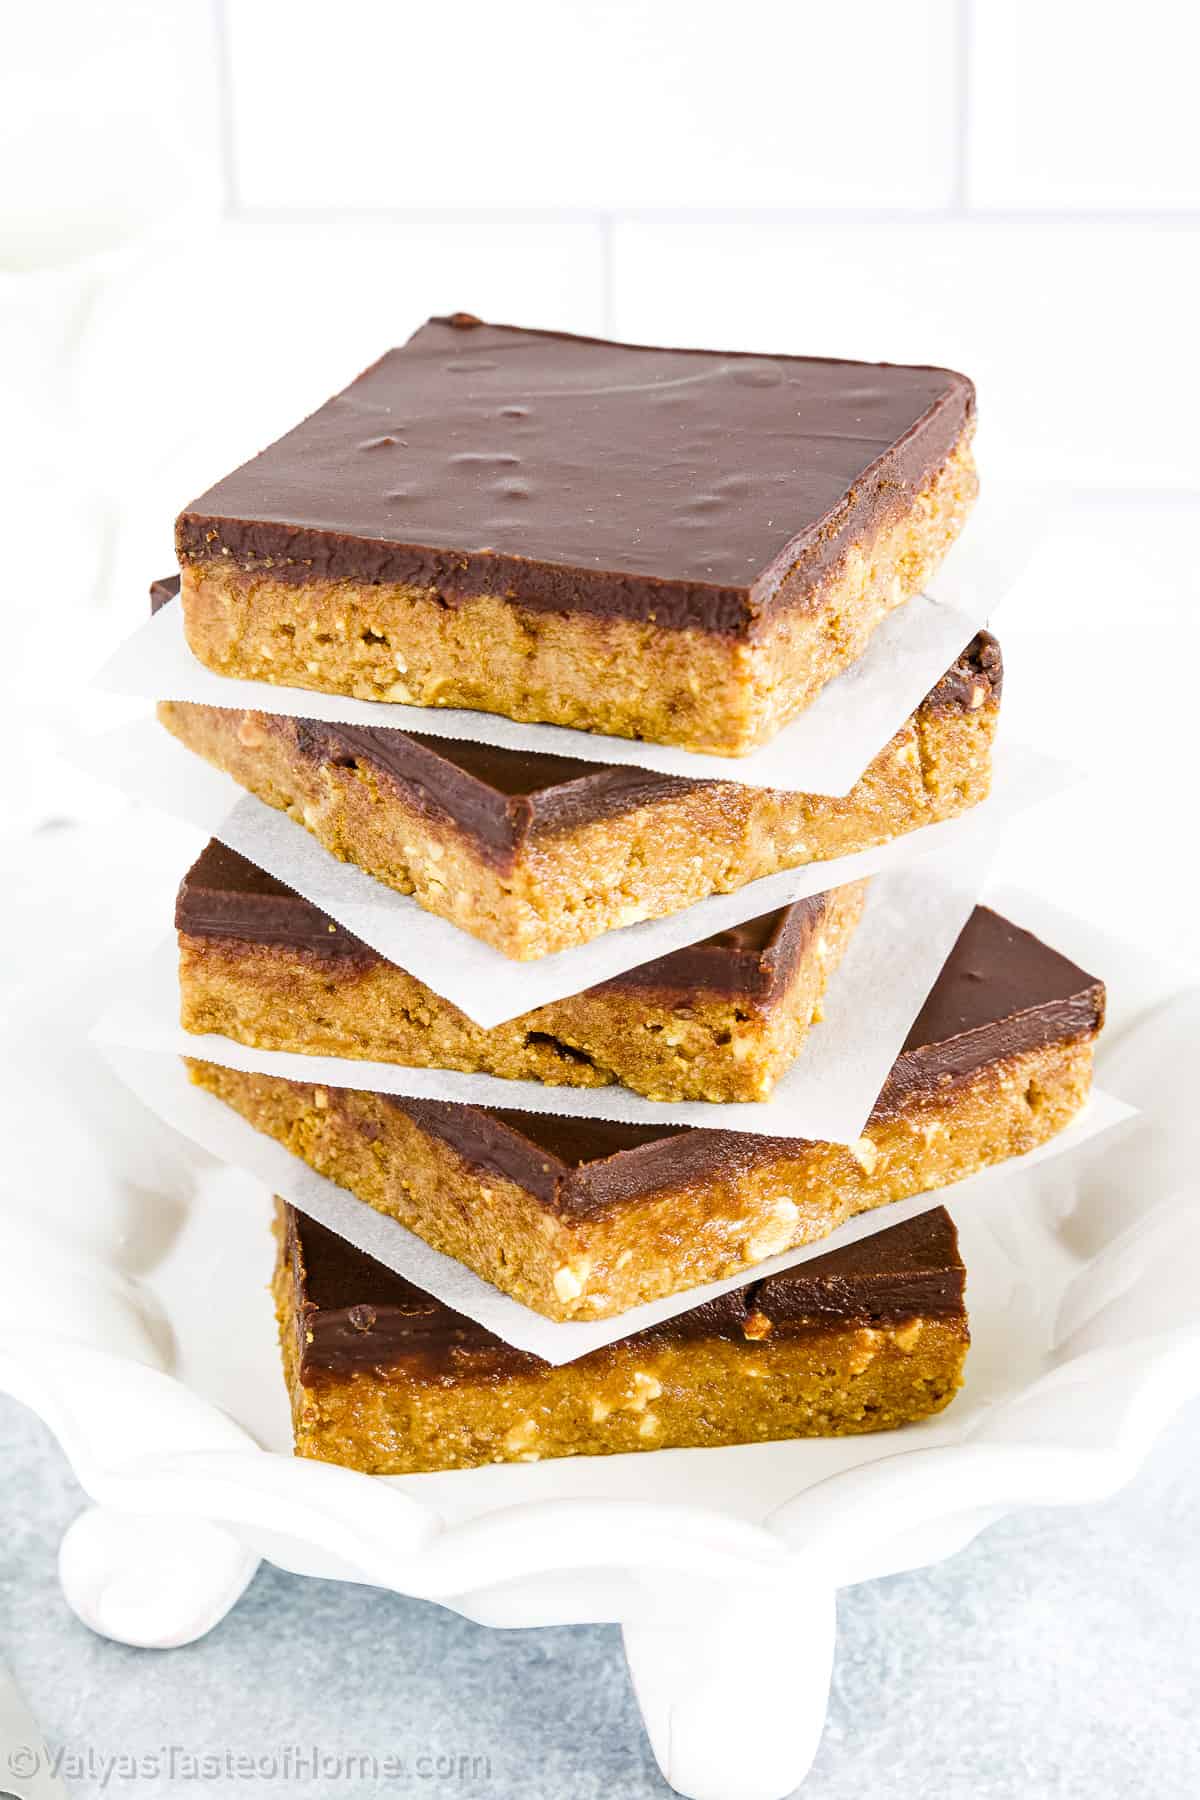 If you're looking for a delicious, foolproof no bake dessert, then these No Bake Peanut Butter Bars are the ones for you!